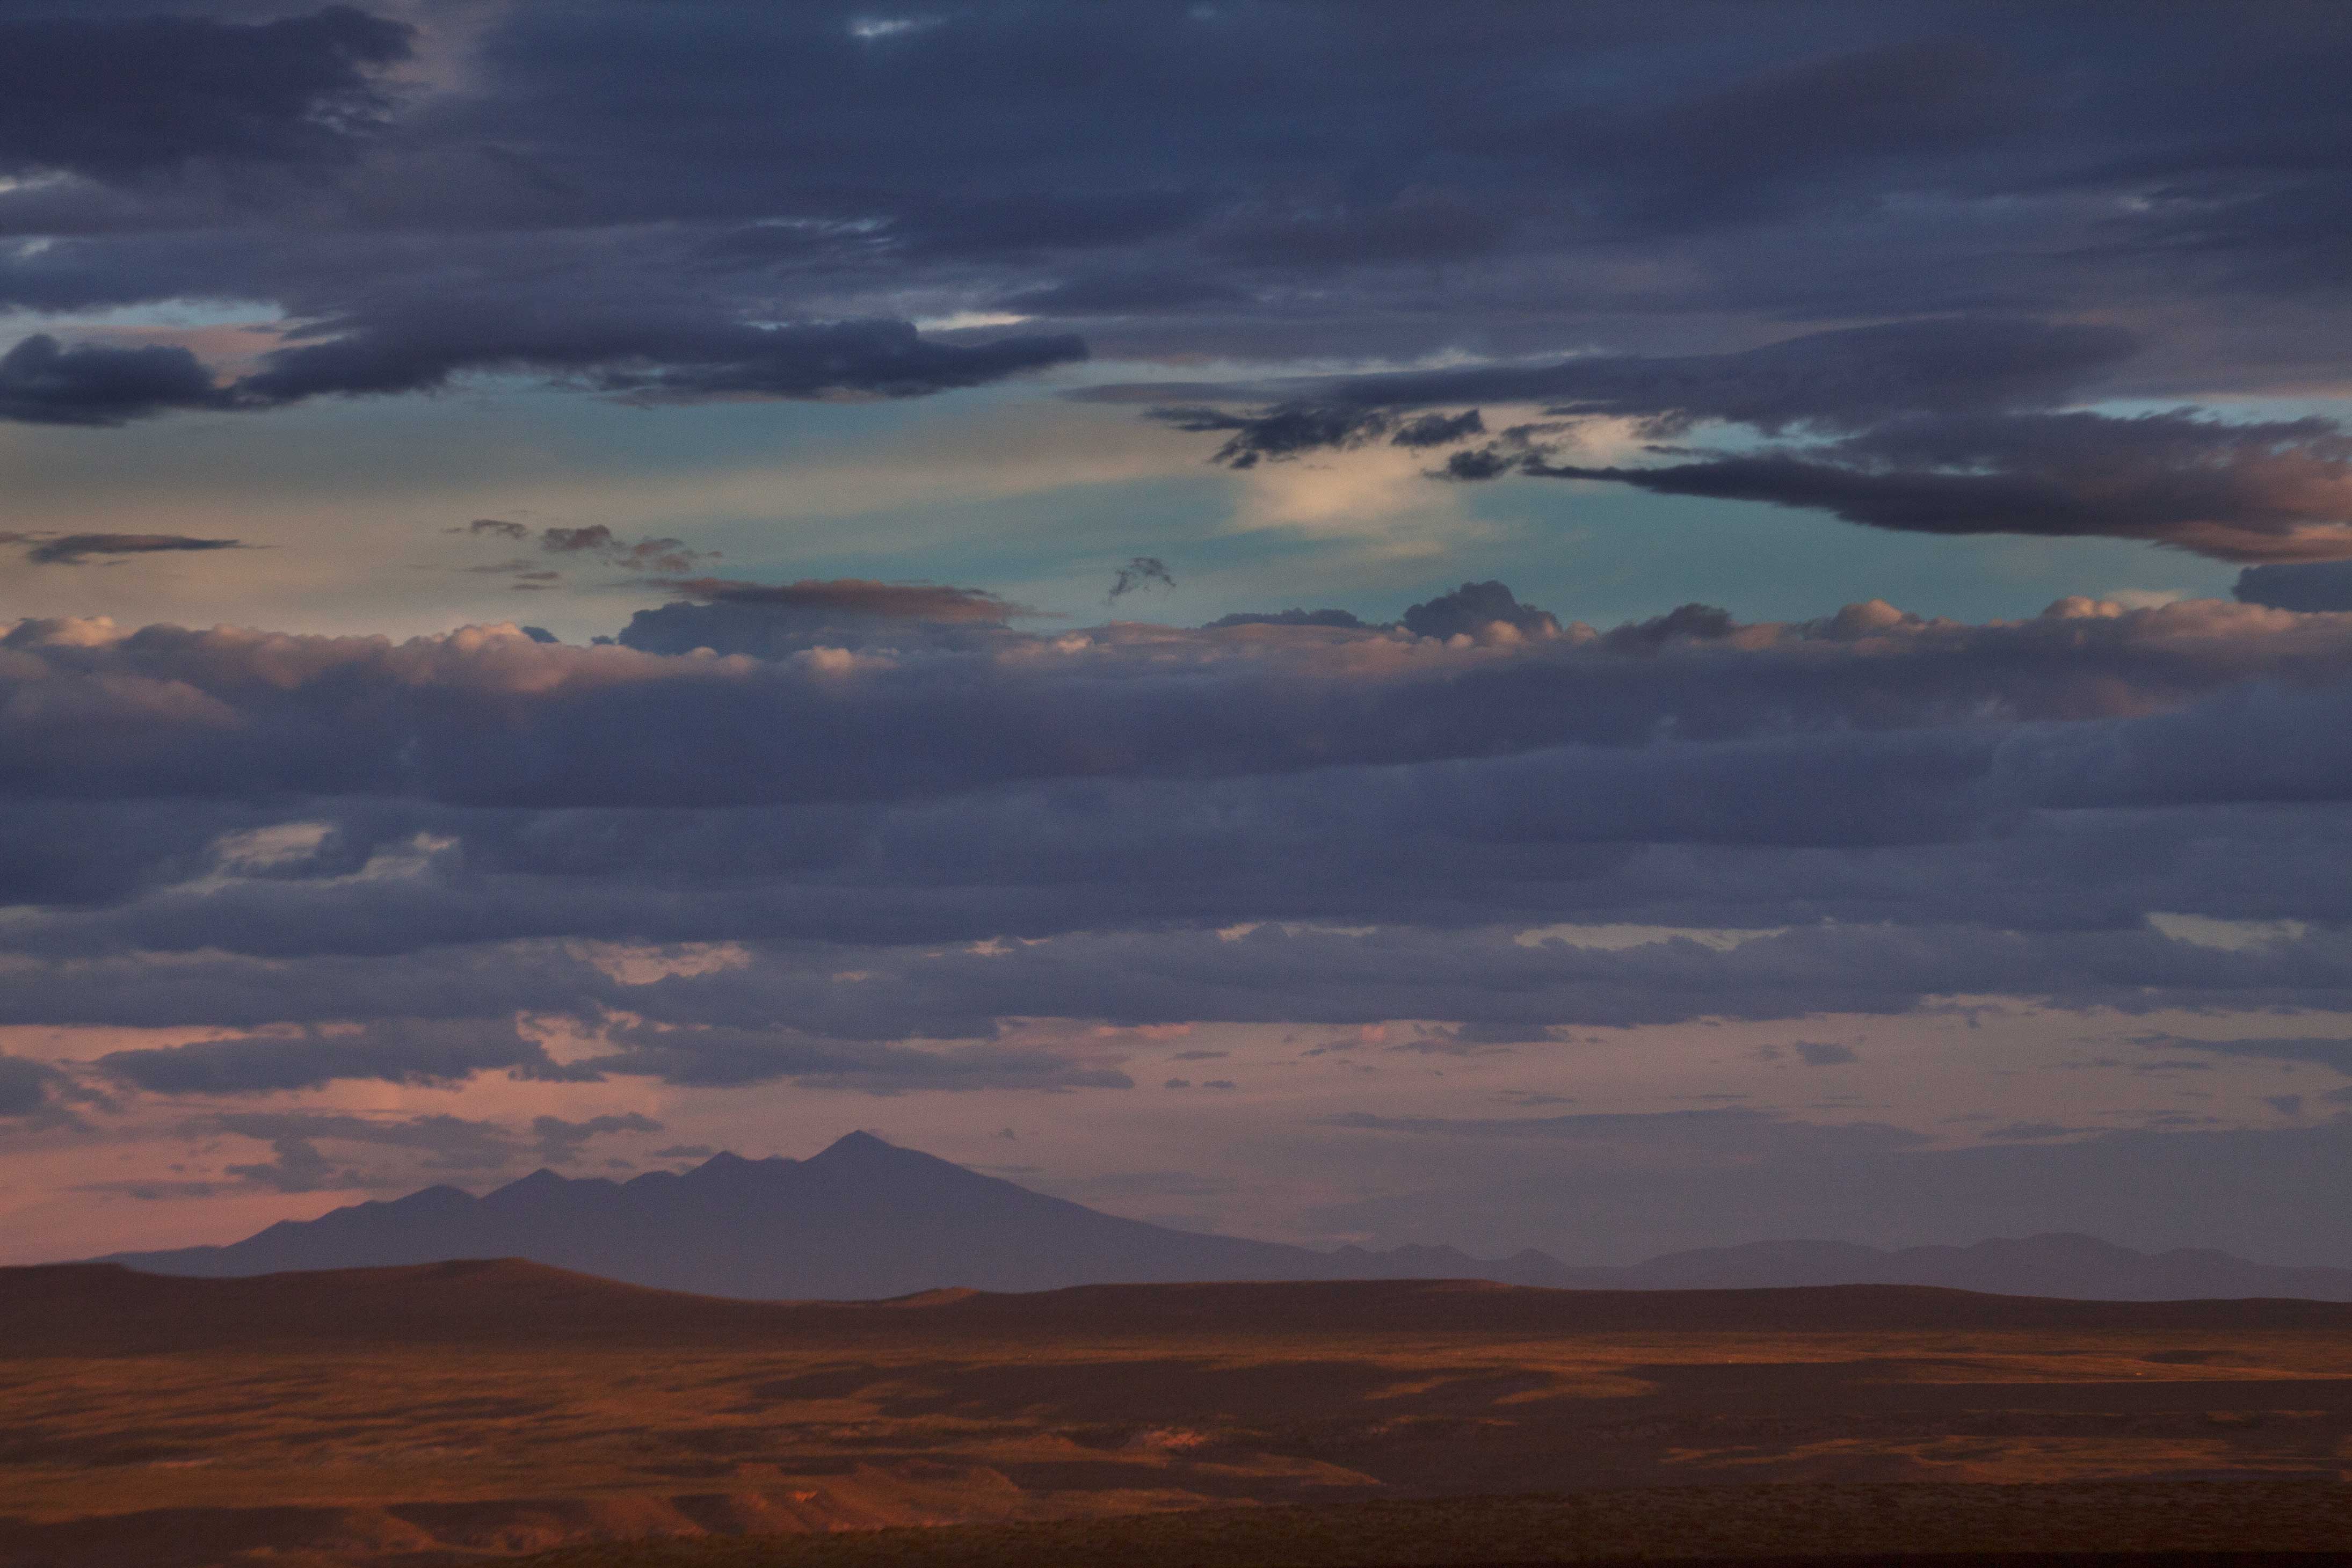 Looking south from the Navajo Reservation toward the distant San Francisco Peaks